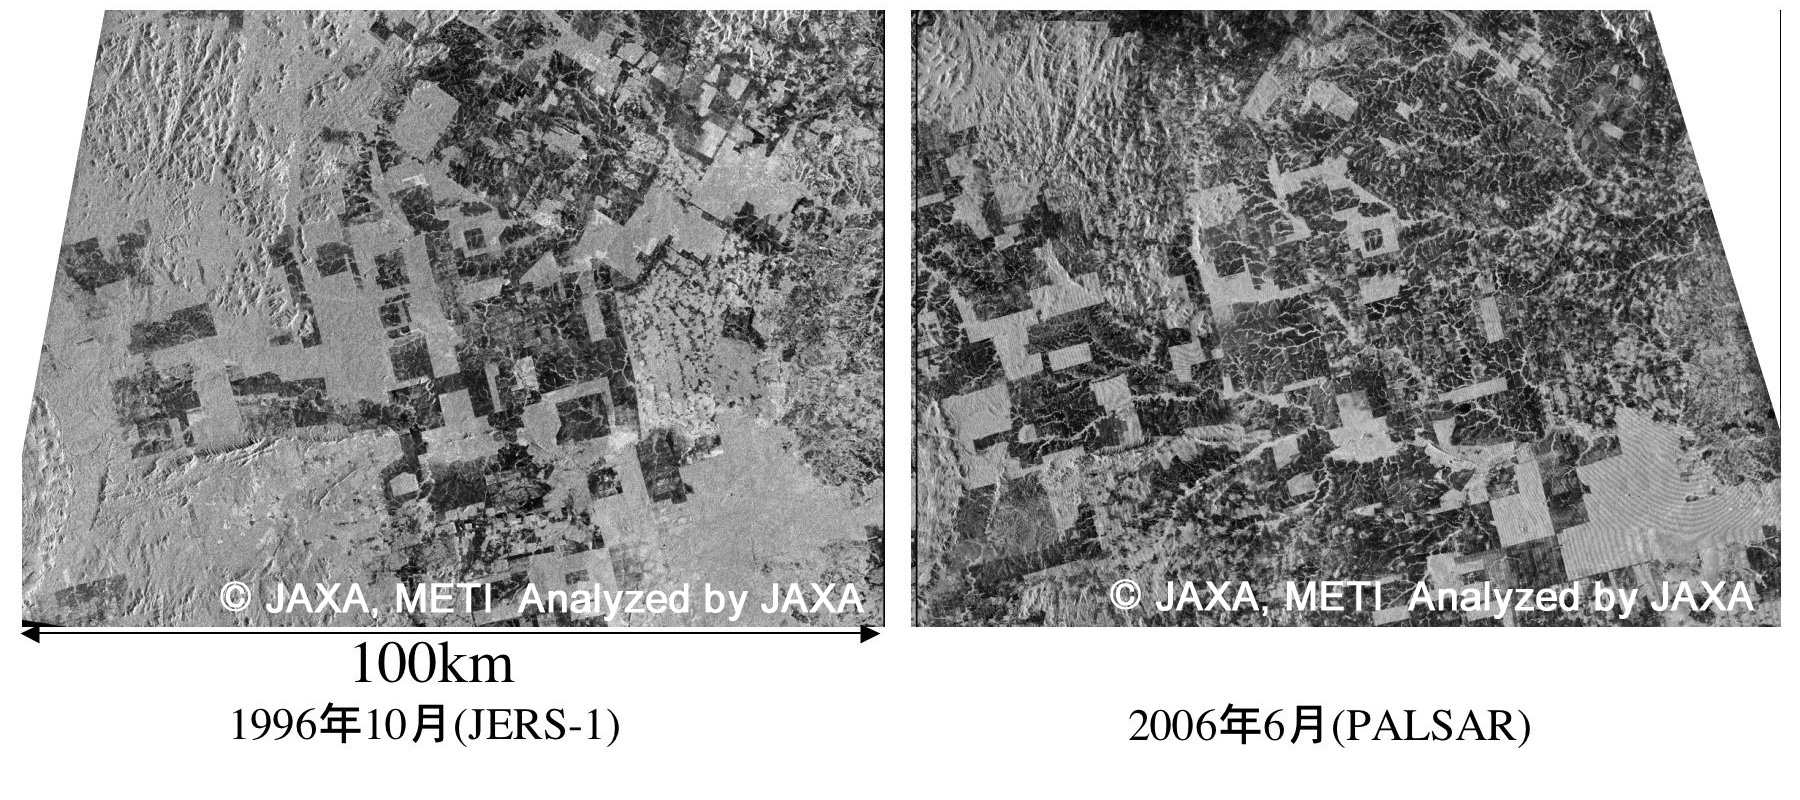 Forest of Amazon observed by JERS-1 SAR (Left fig., on October 1996) and PALSAR (Daichi) (Right fig., on June 2006)